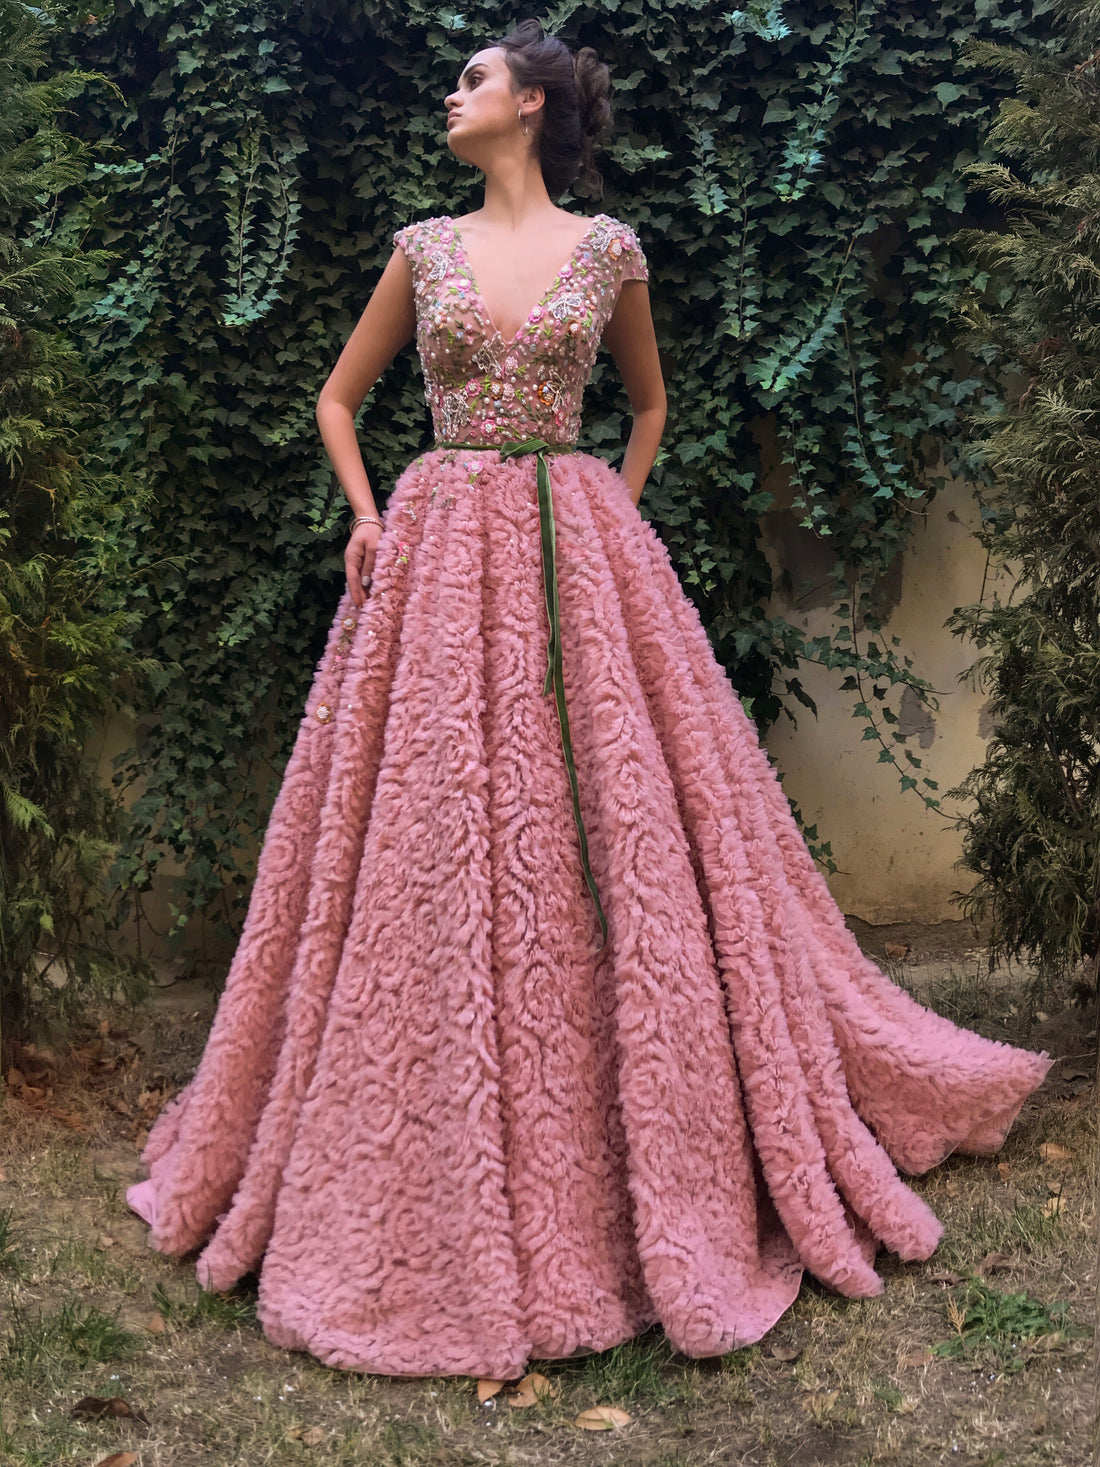 Blooming Glamour Gown | Teuta Matoshi